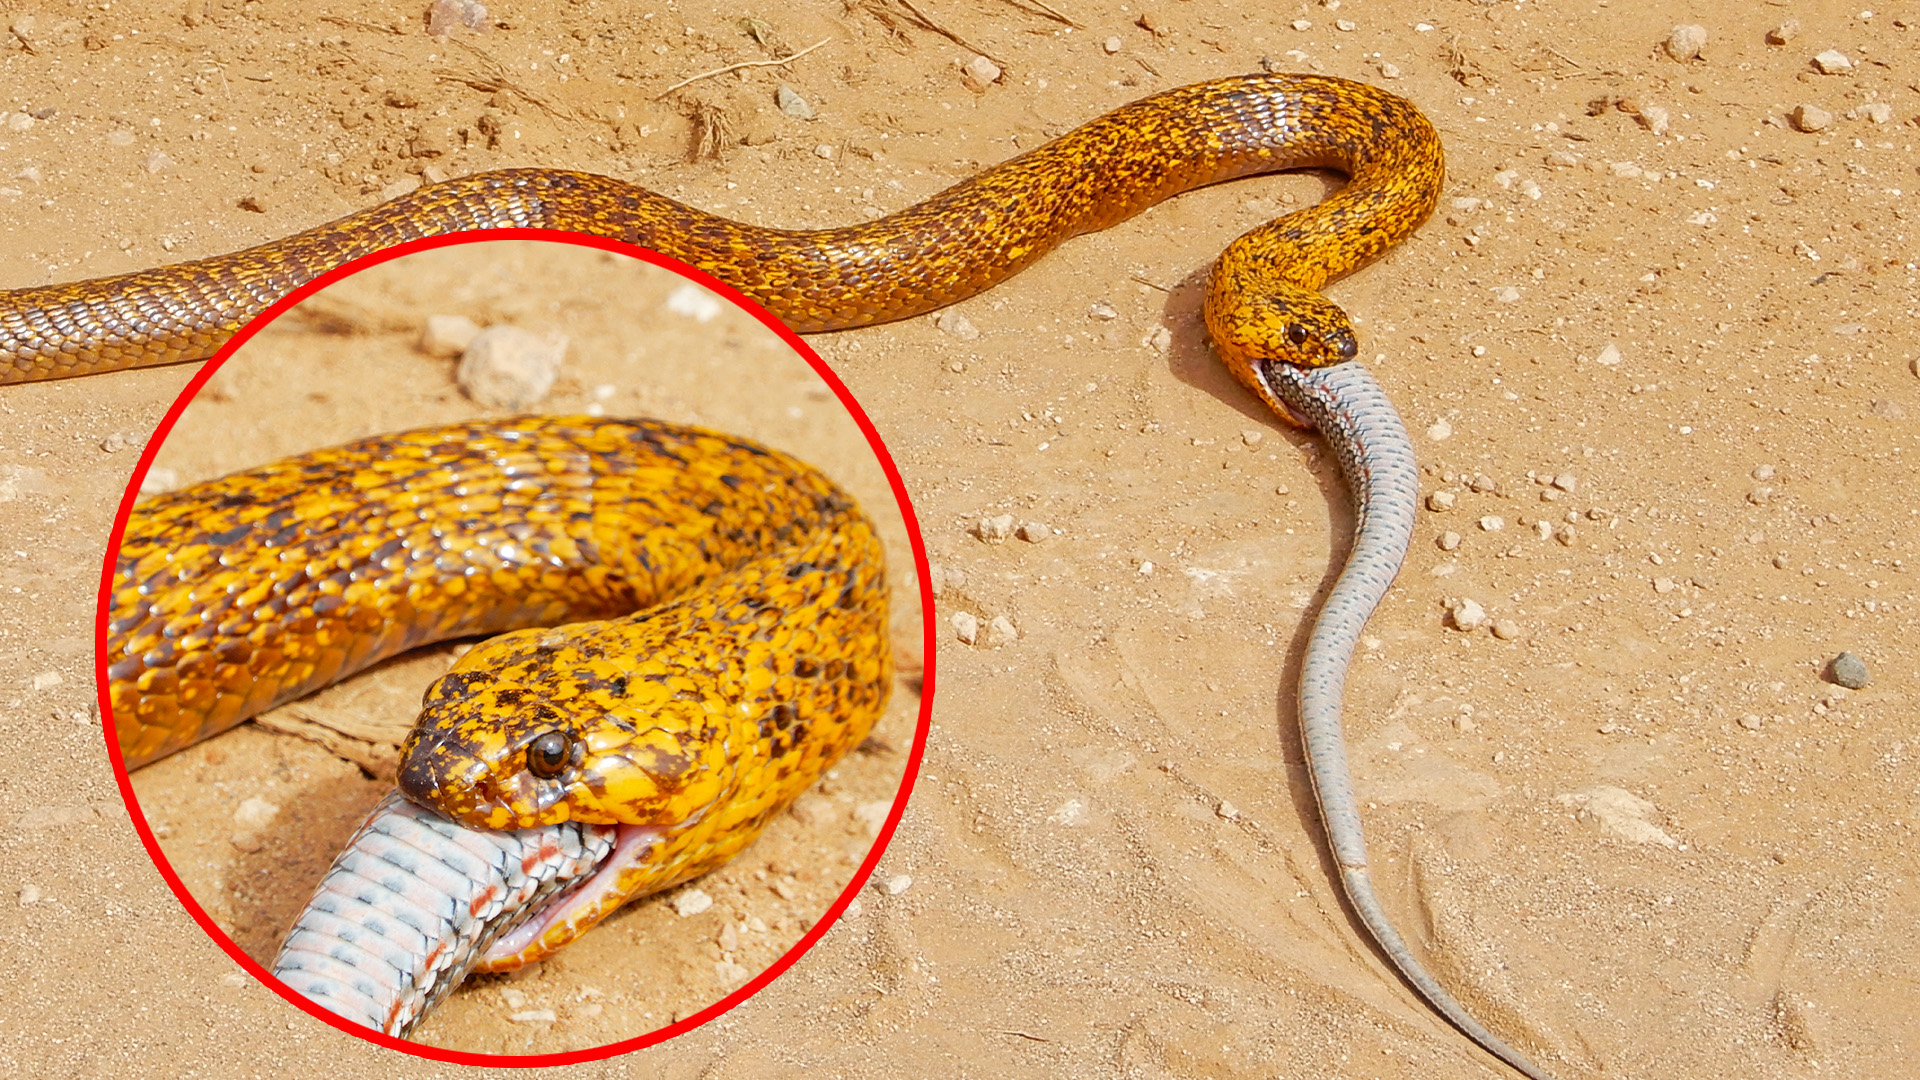 Cobra Swallows Entire Snake in Road